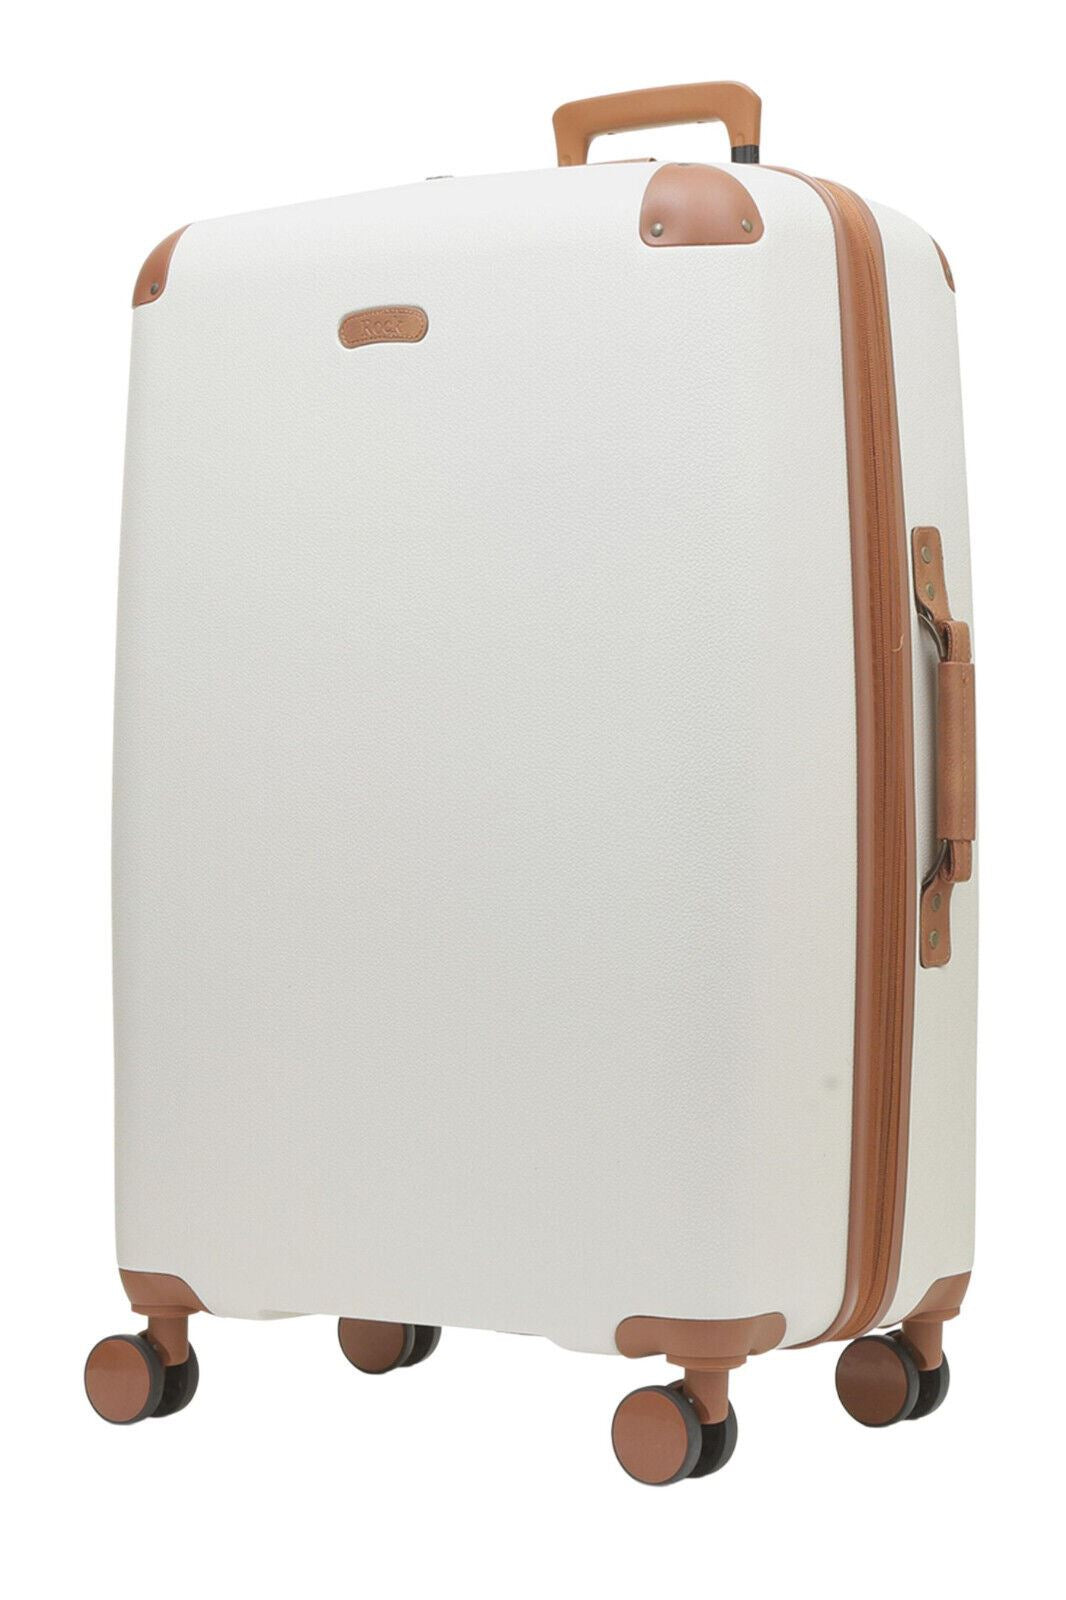 Anderson Large Hard Shell Suitcase in Cream